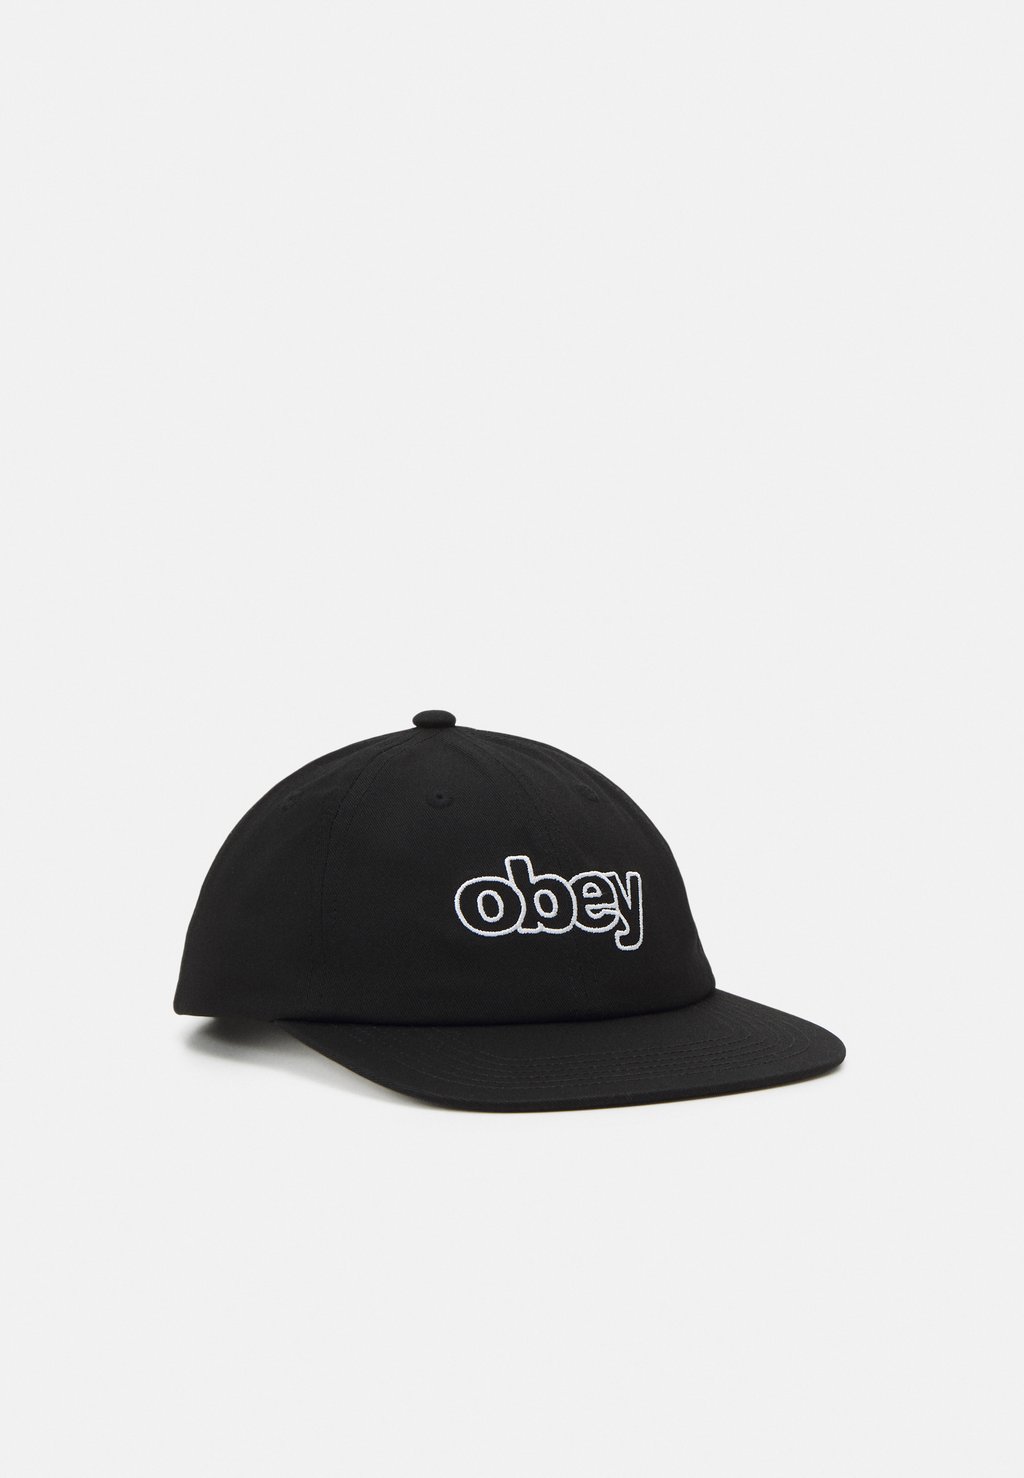 Кепка Obey Clothing OBEY SELECT 6 PANEL SNAPBACK, черный кепка records 5 panel snapback unisex obey clothing черный